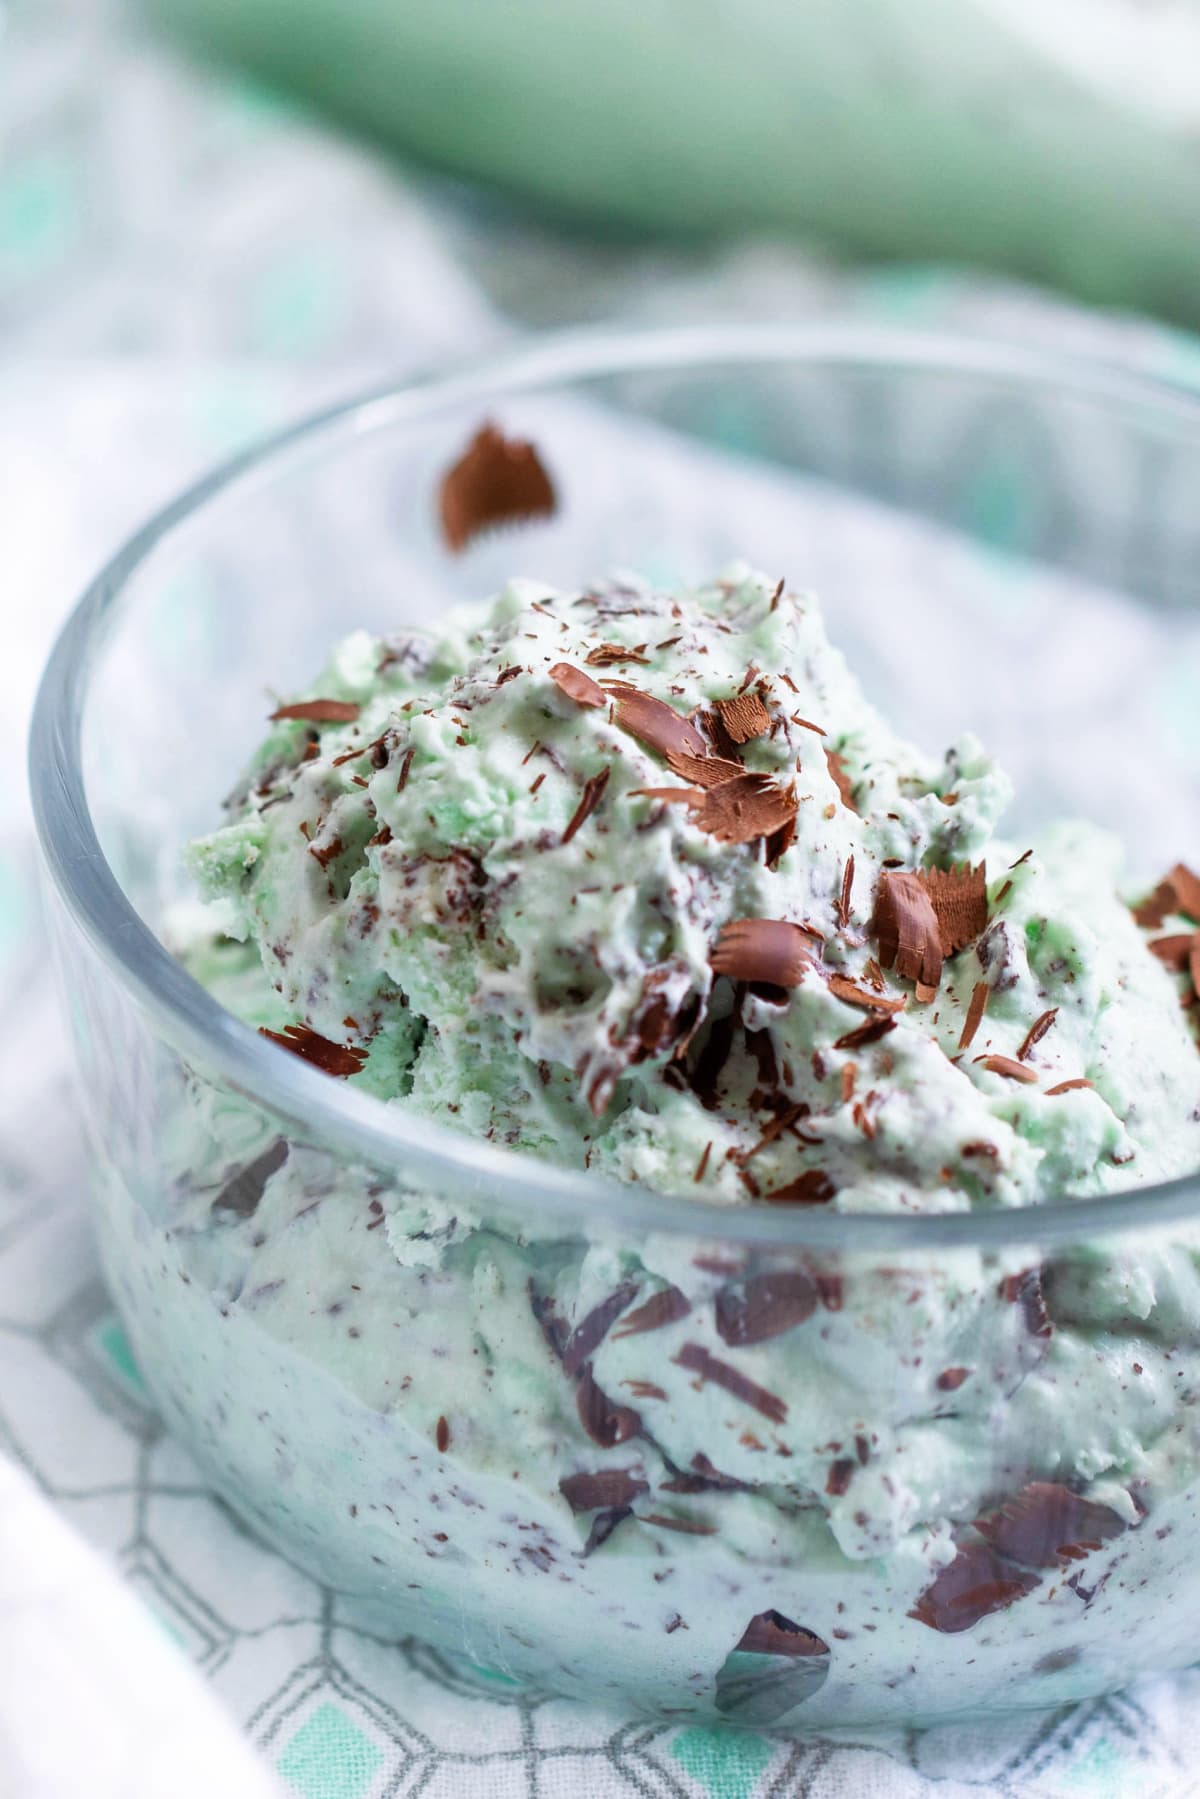 Mint chocolate chip ice cream with shaved chocolate